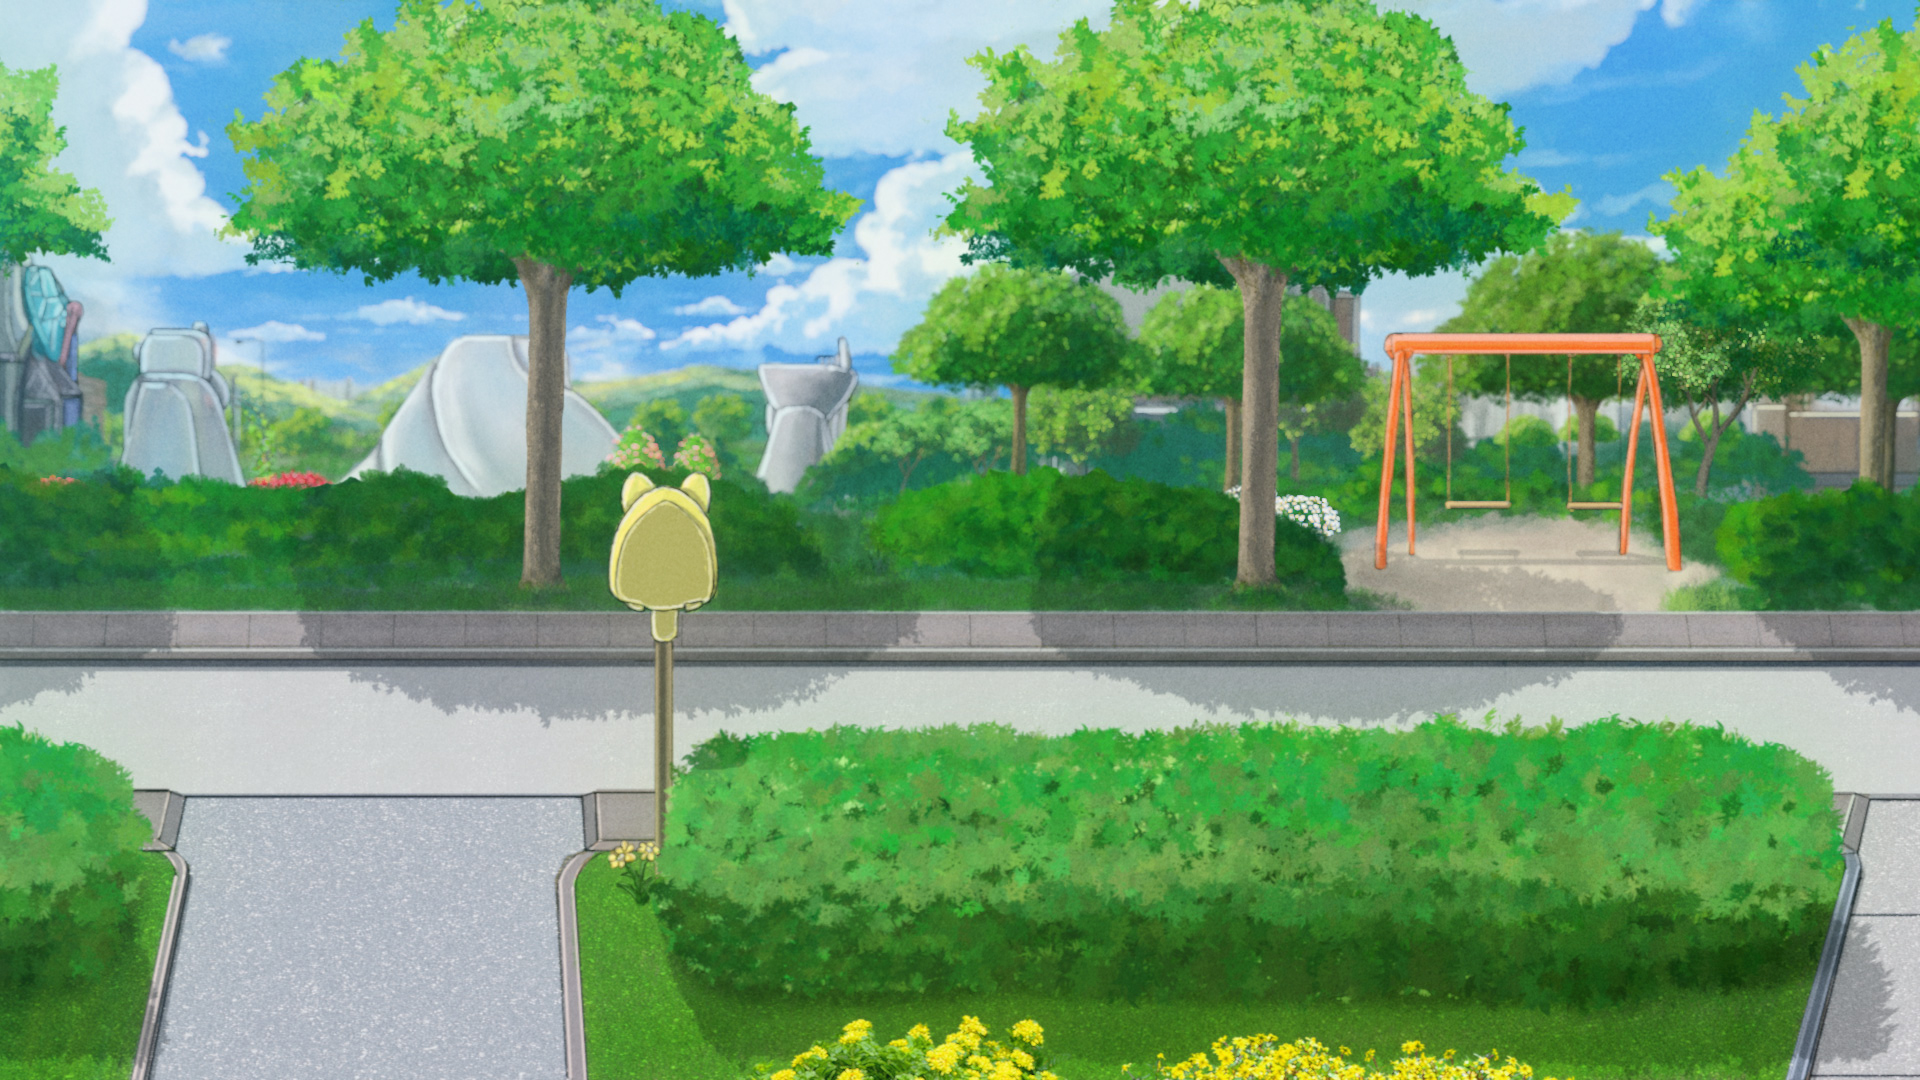 Outdoors Digital Art Nature Anime Grass Plants Trees Road Swings Outskirts 1920x1080